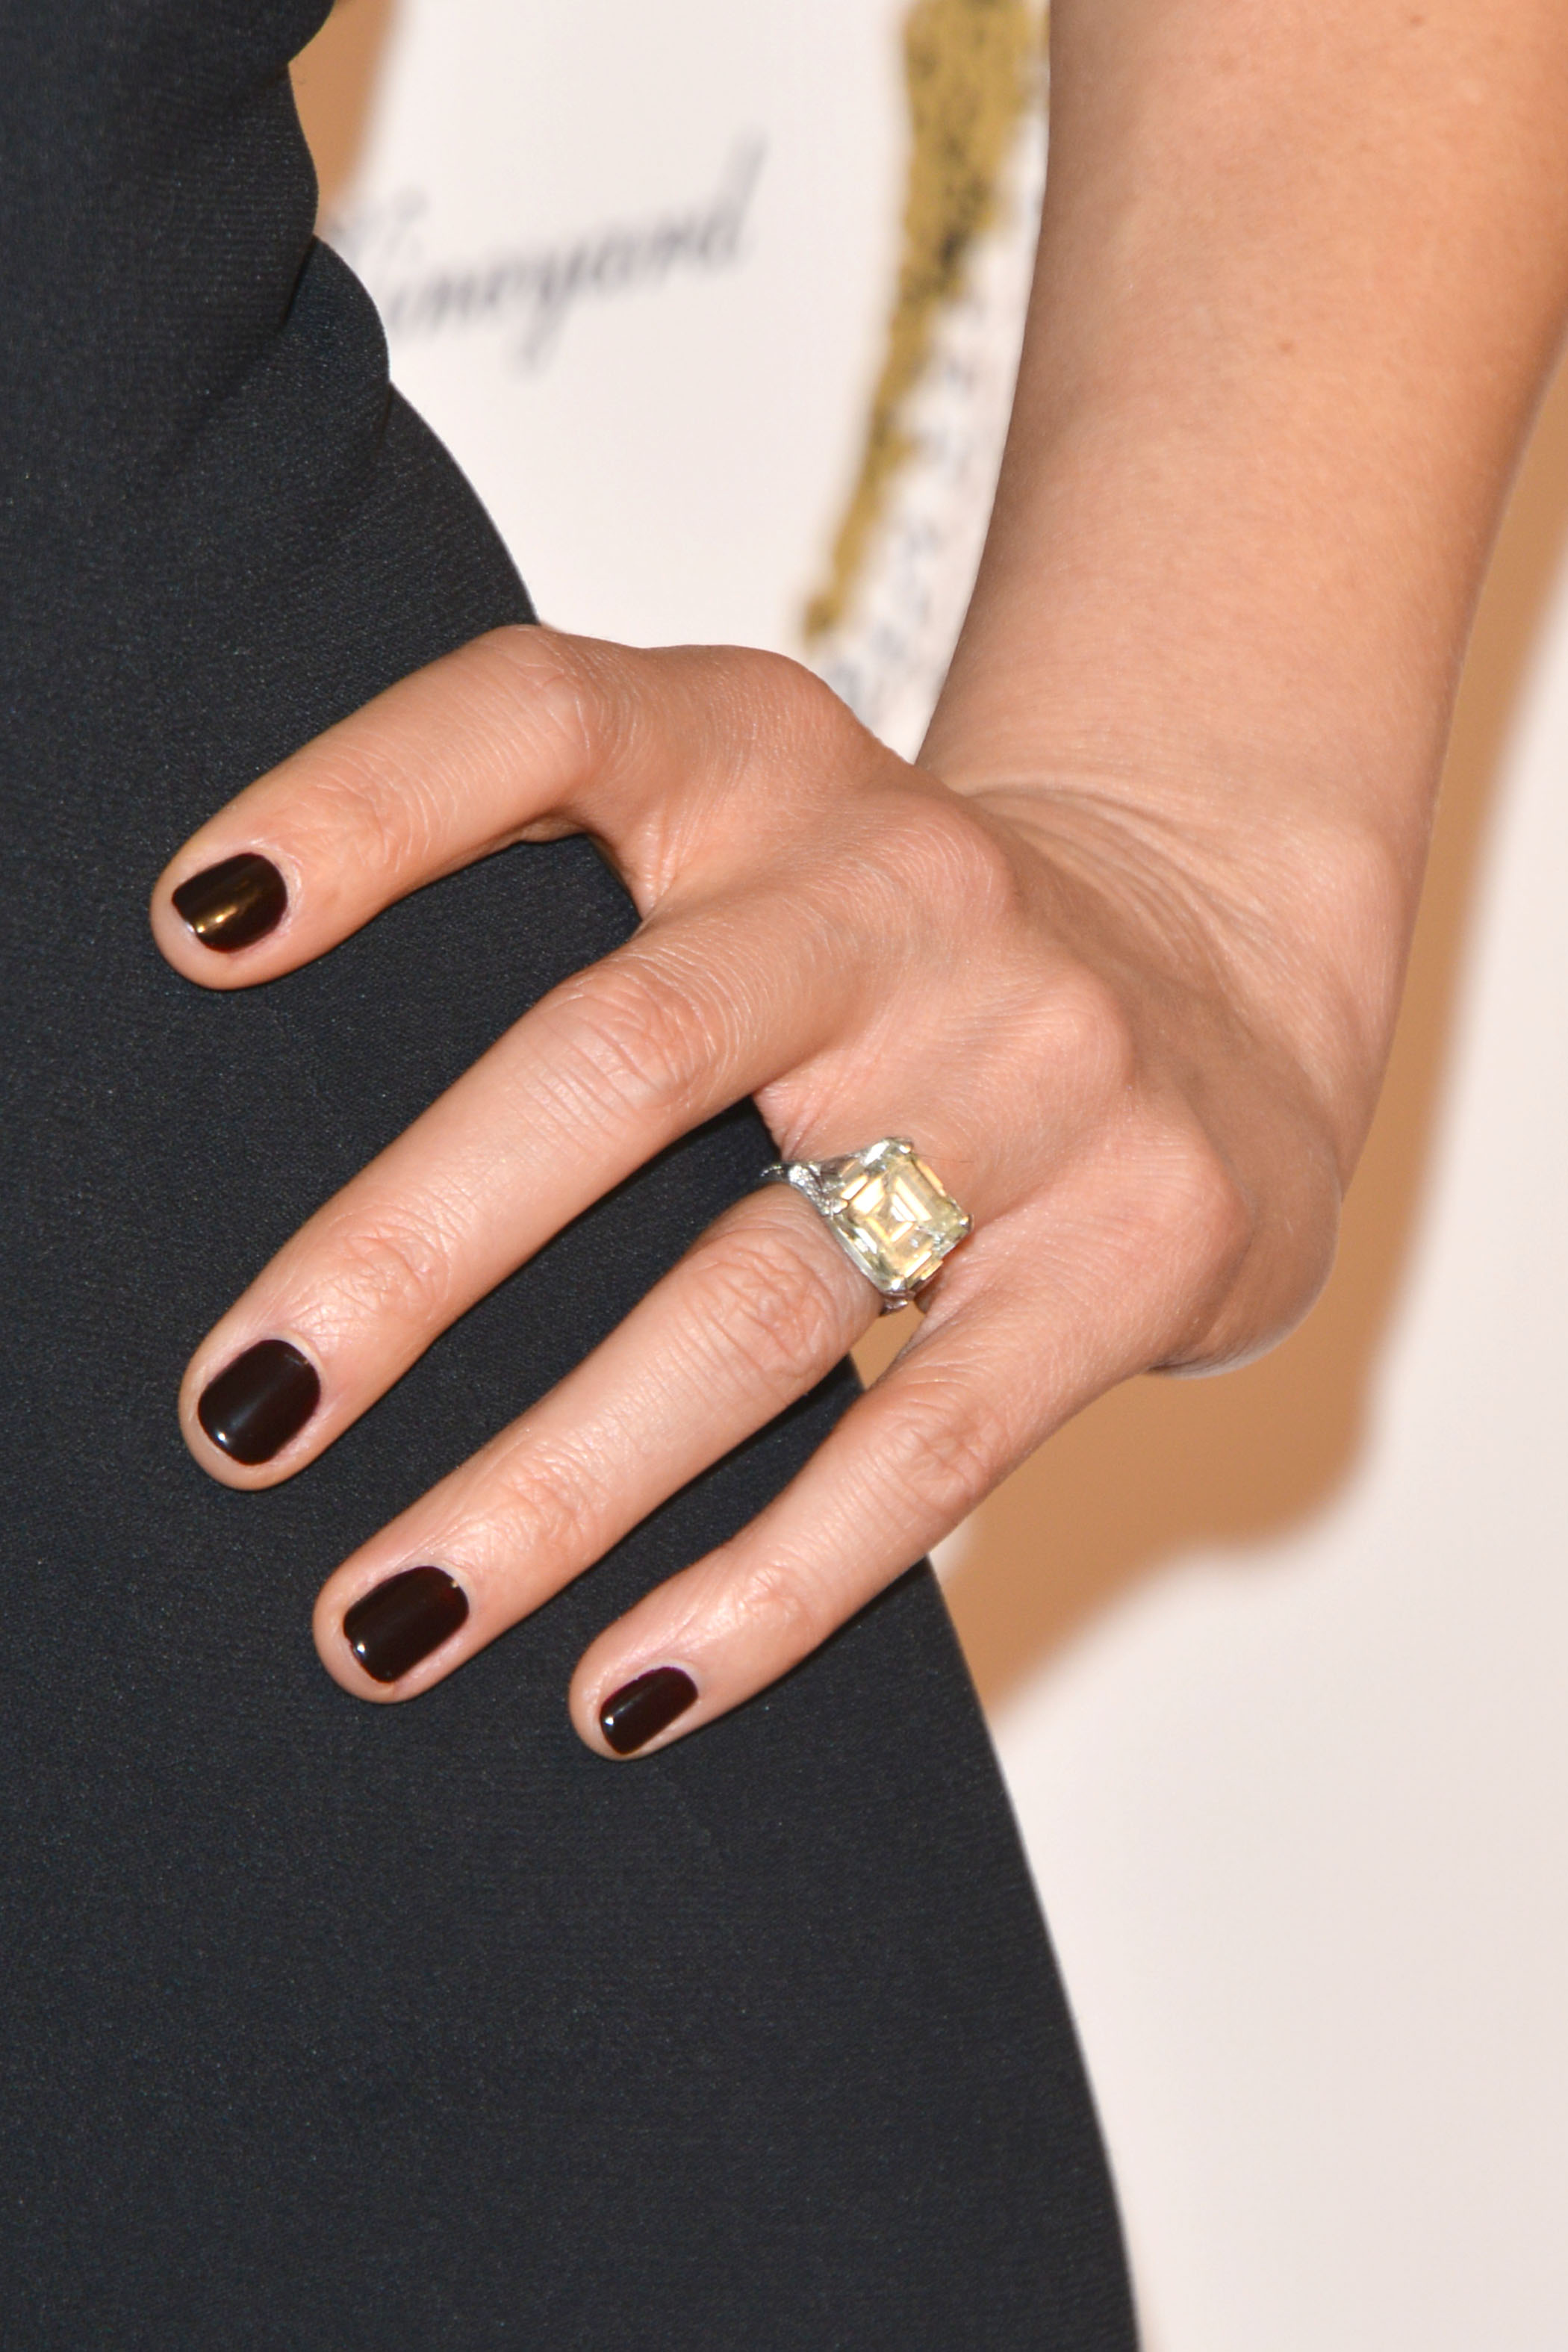 Maggie Q Engagement Ring Factory Sale, UP TO 53% OFF |  www.editorialelpirata.com